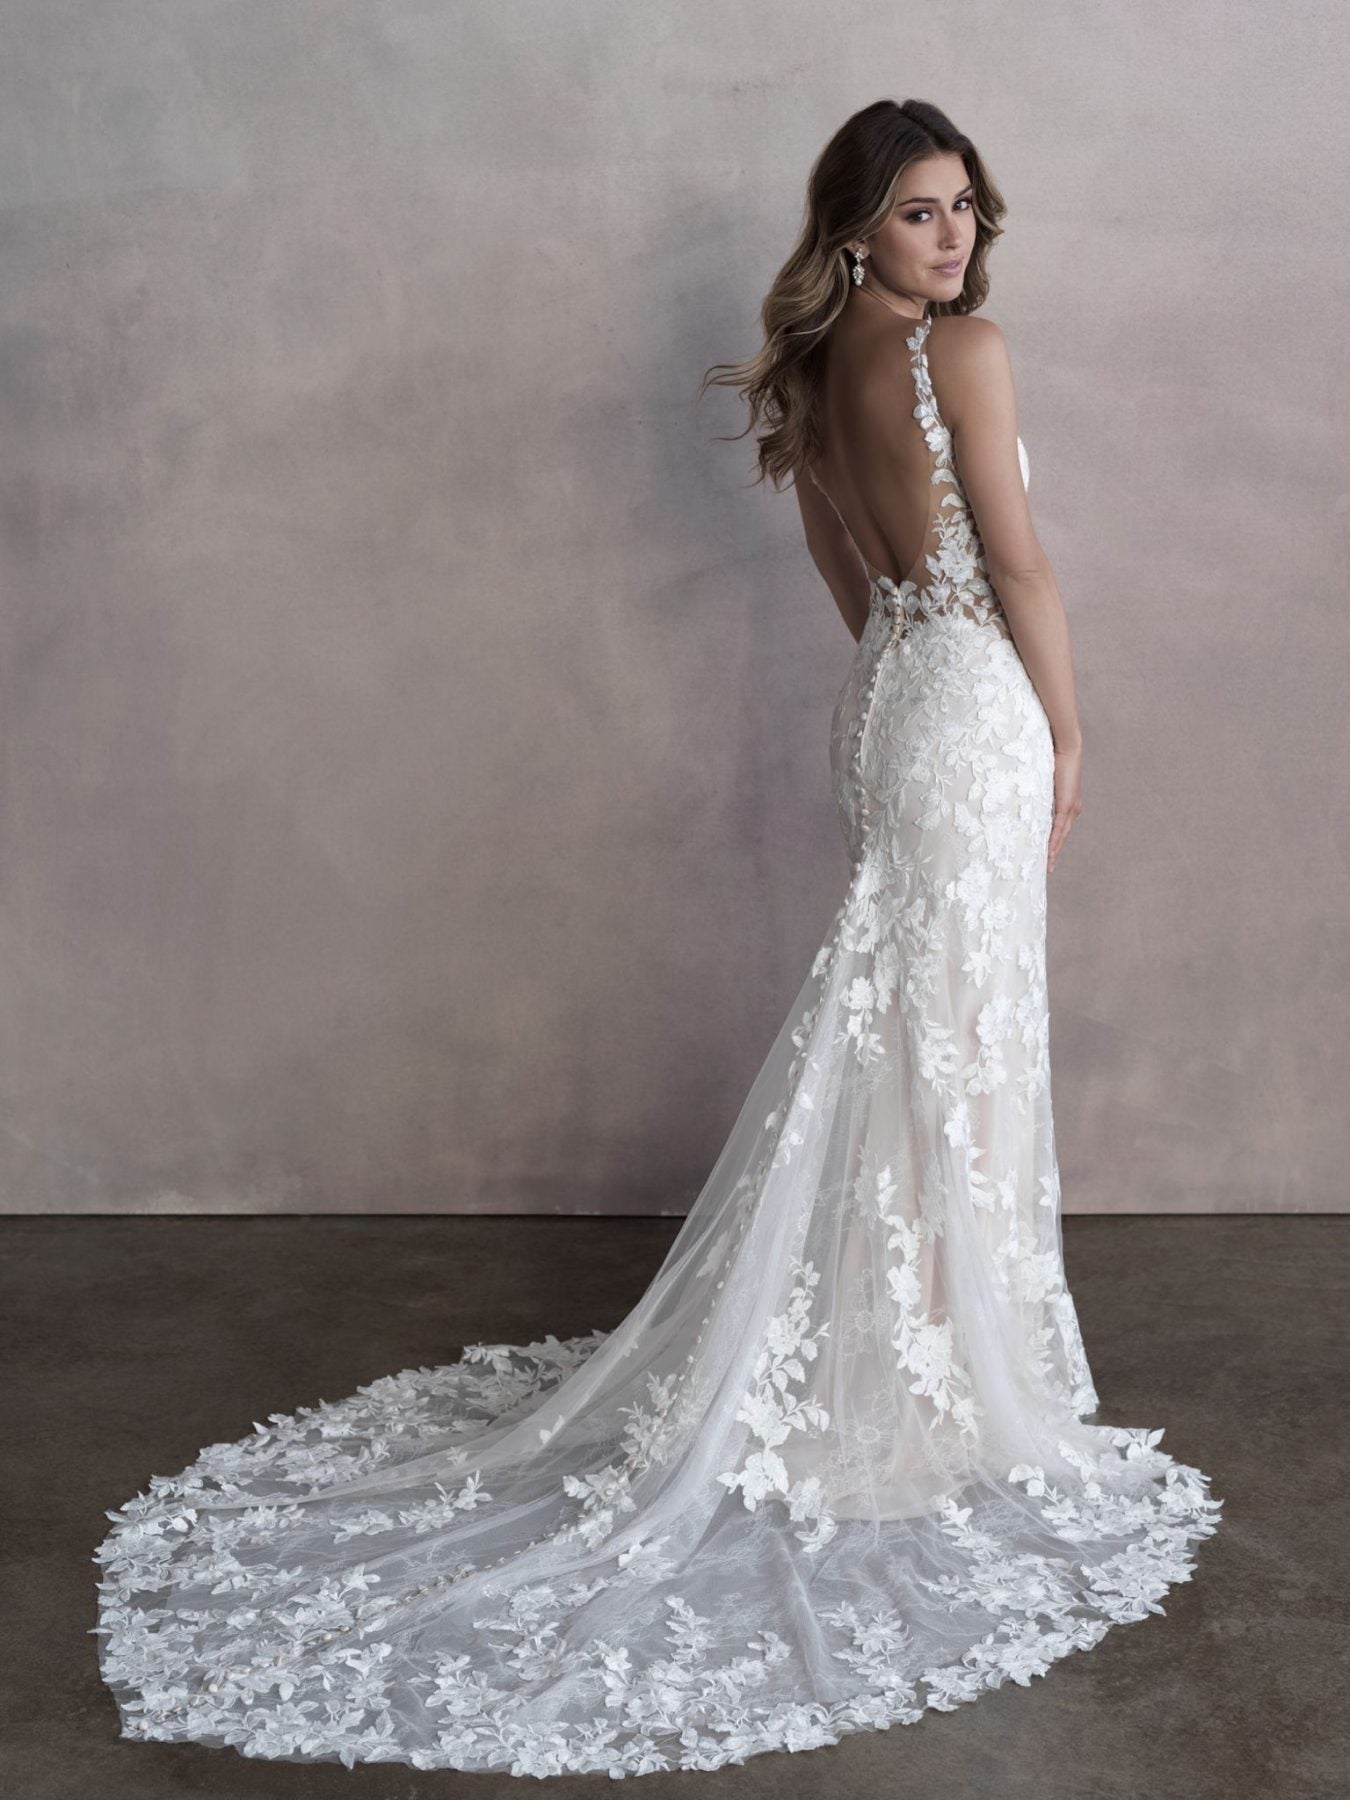 Lace Wedding Dresses Of The Most Beautiful Lace Bridal Gowns | My XXX ...